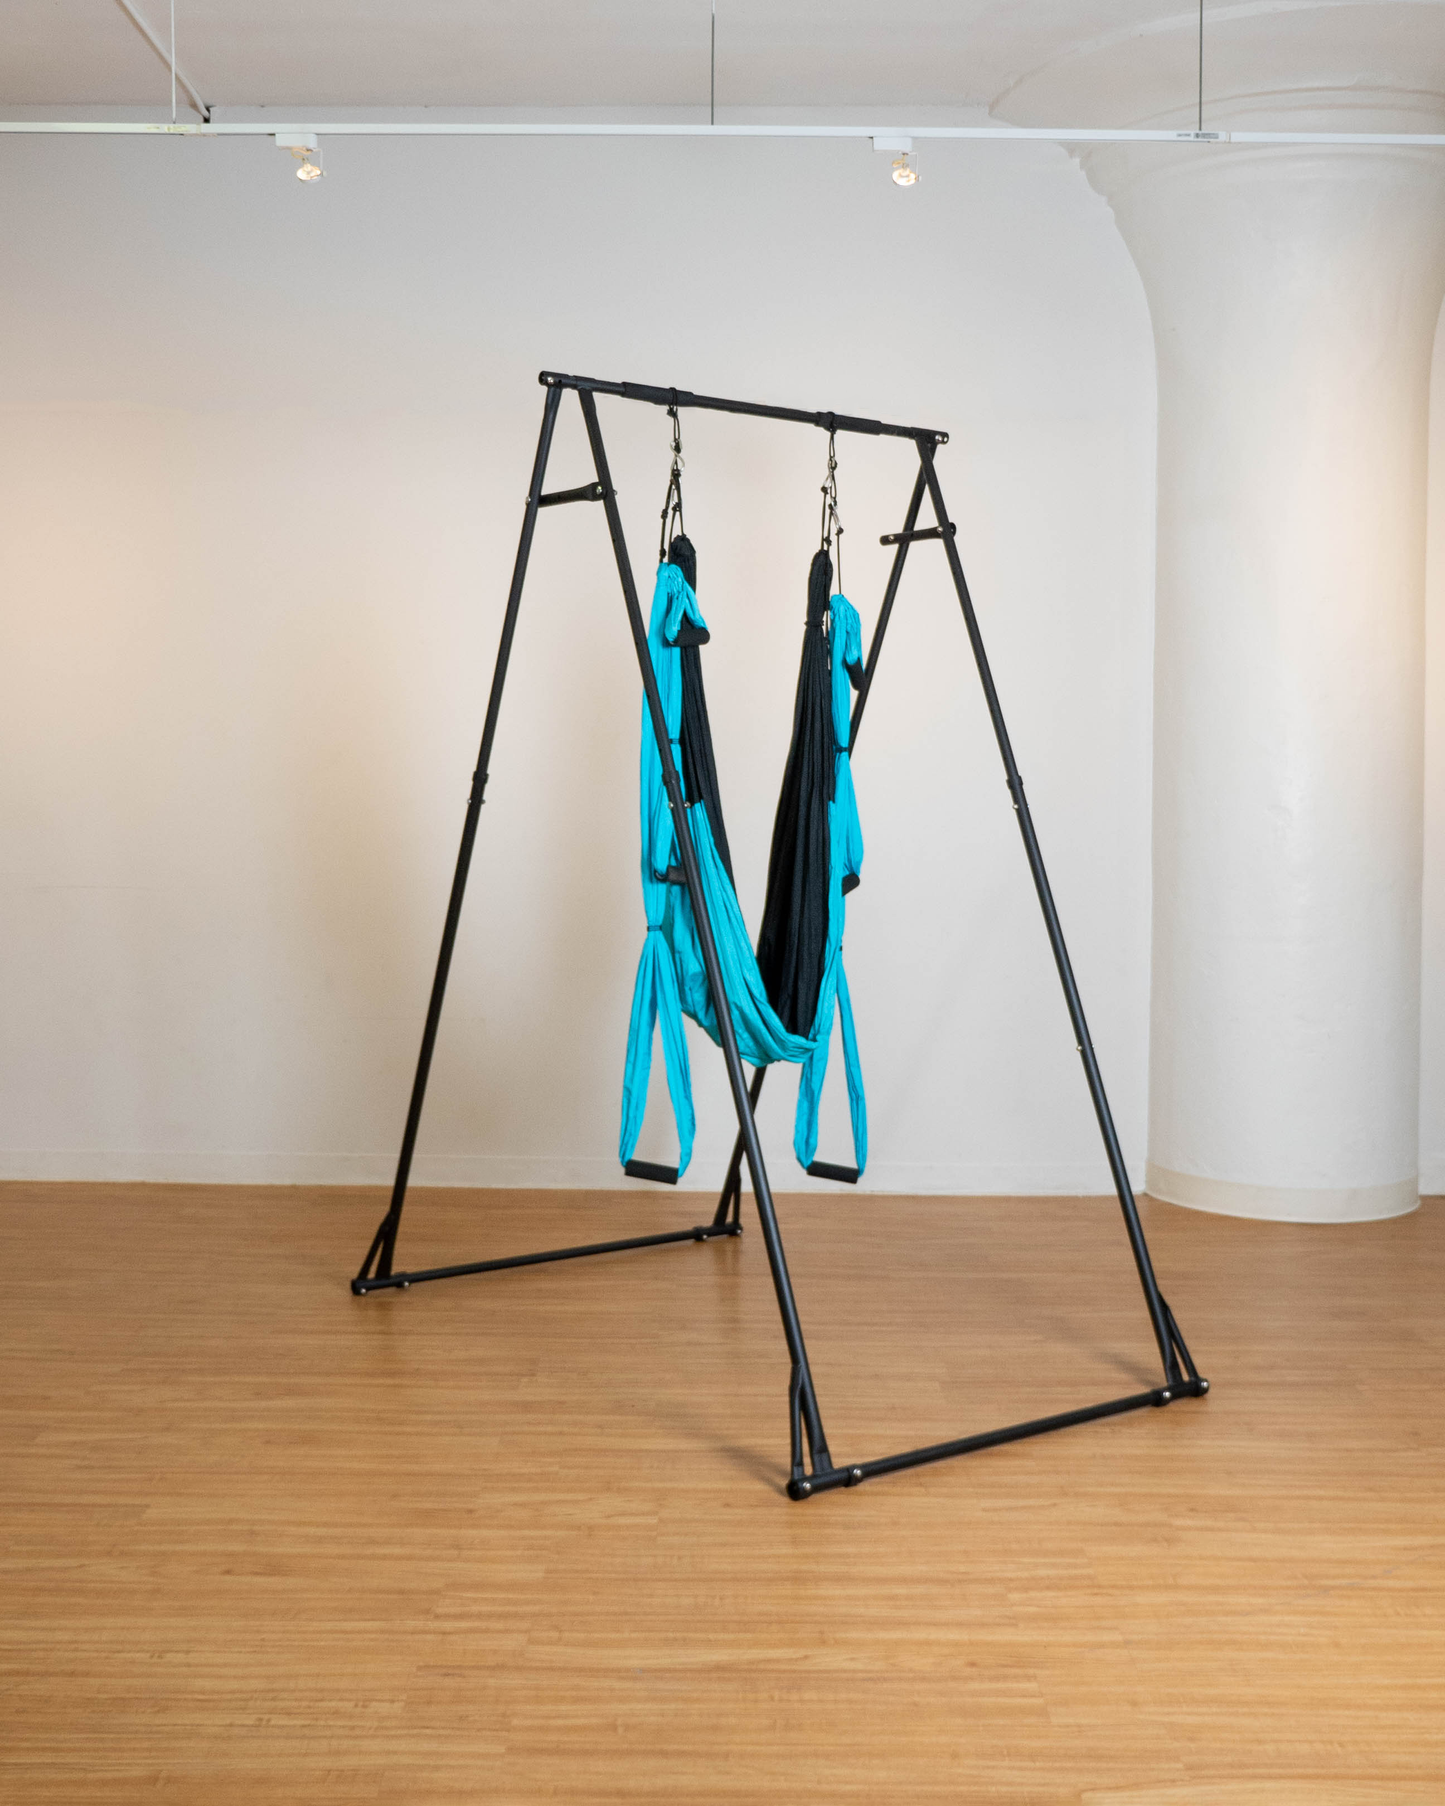 Suspension Stand & YogiGym Combo Summer Sale!